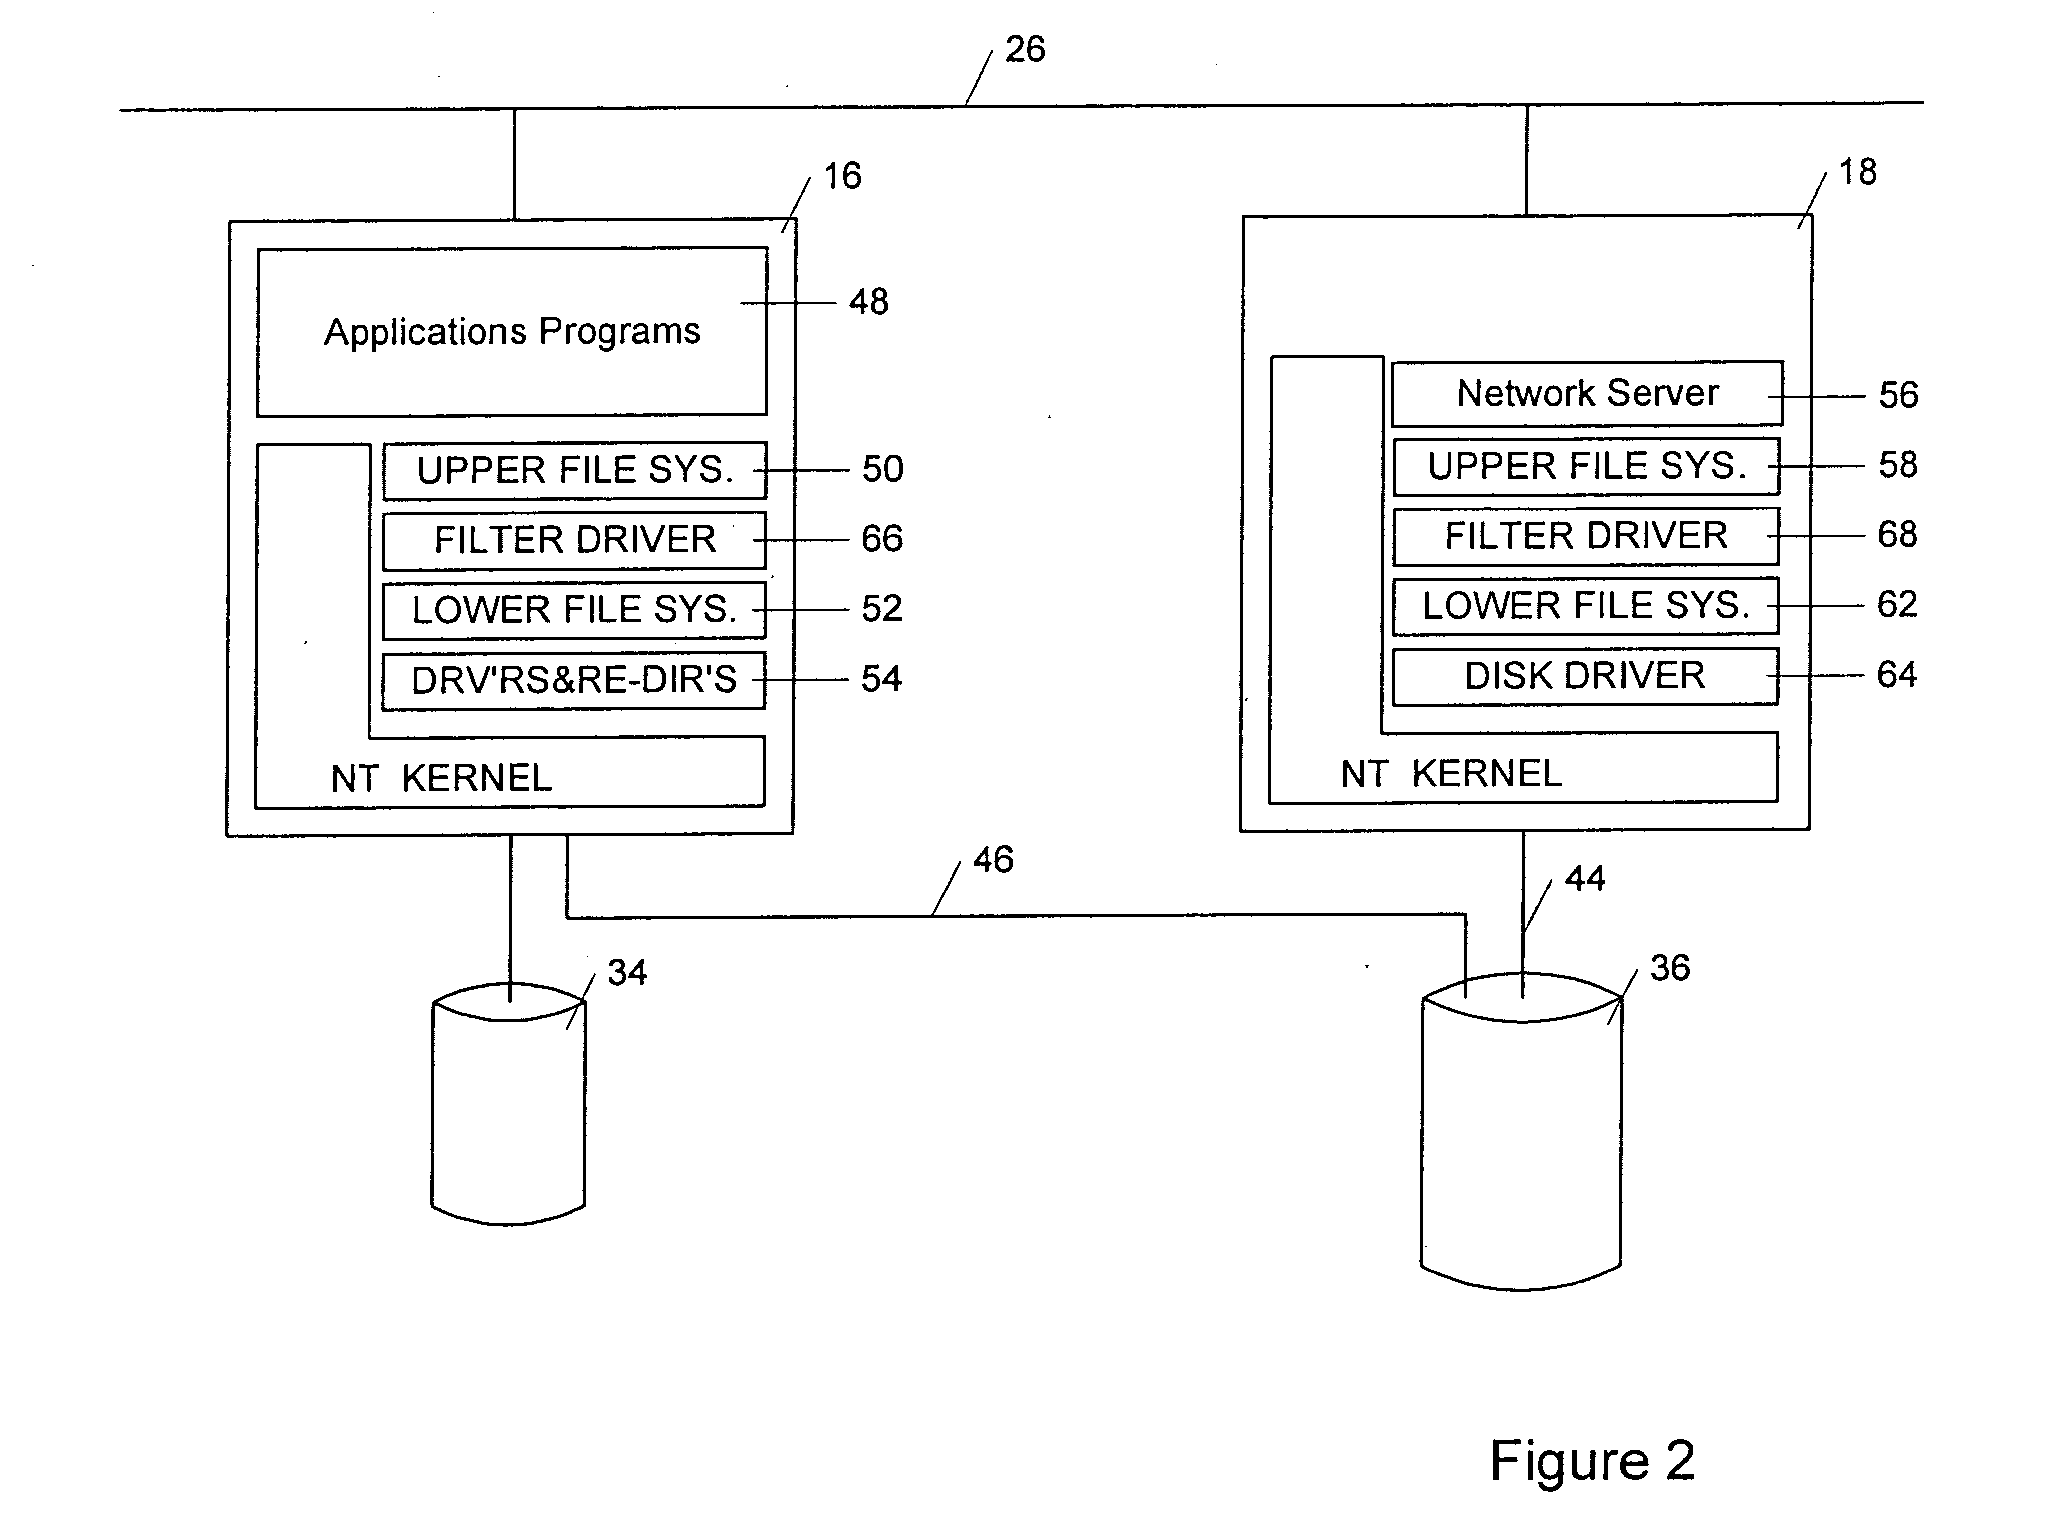 Low overhead methods and apparatus shared access storage devices